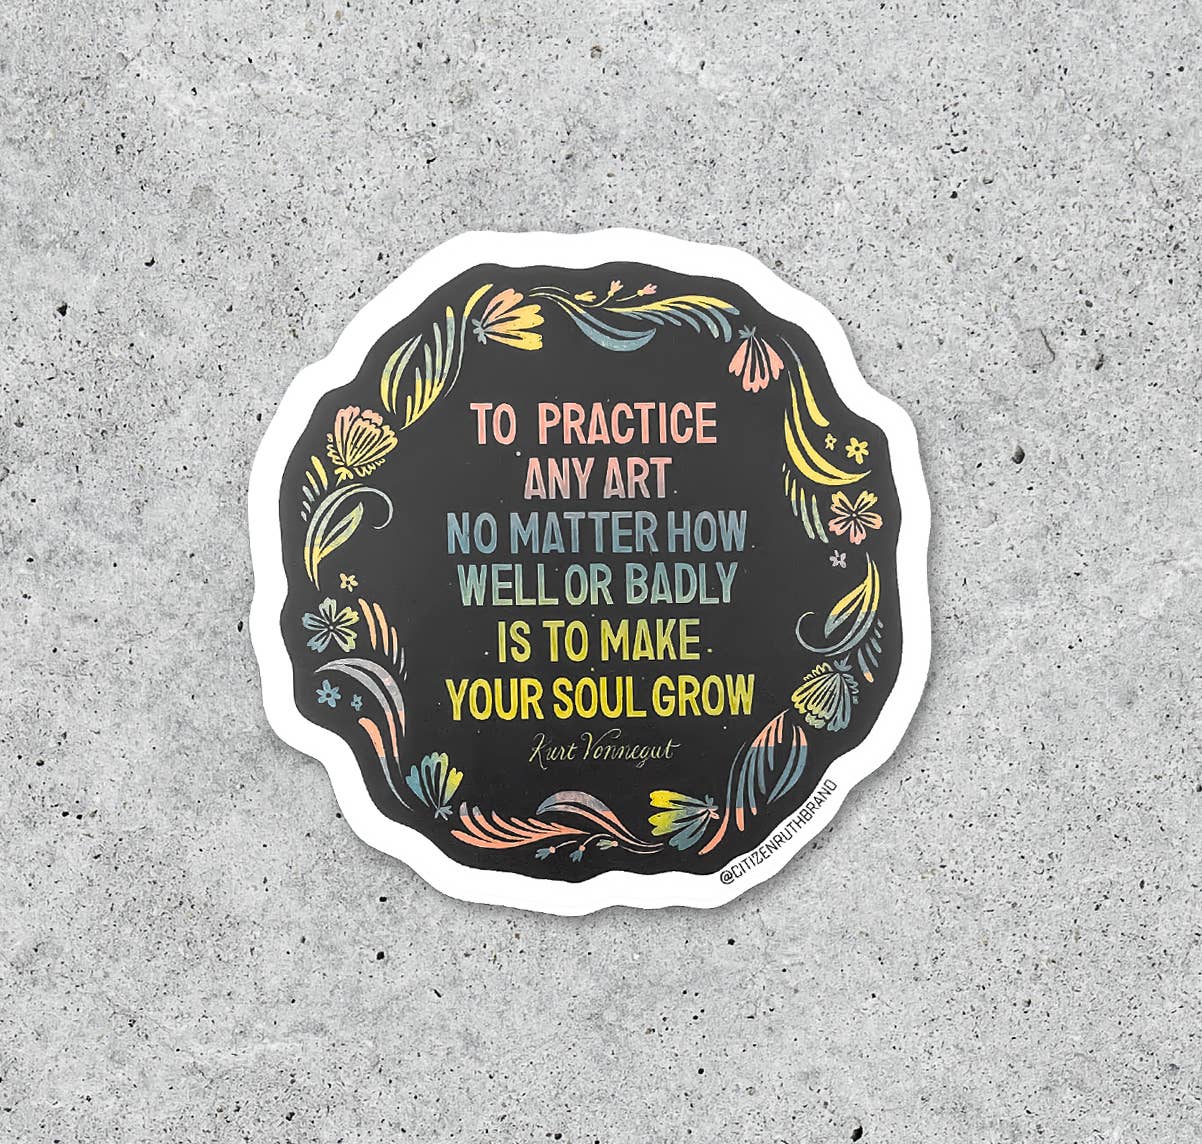 To Practice any art no matter how well or badly is to make your soul grow - Kurt Vonnegut quote sticker by Citizen Ruth